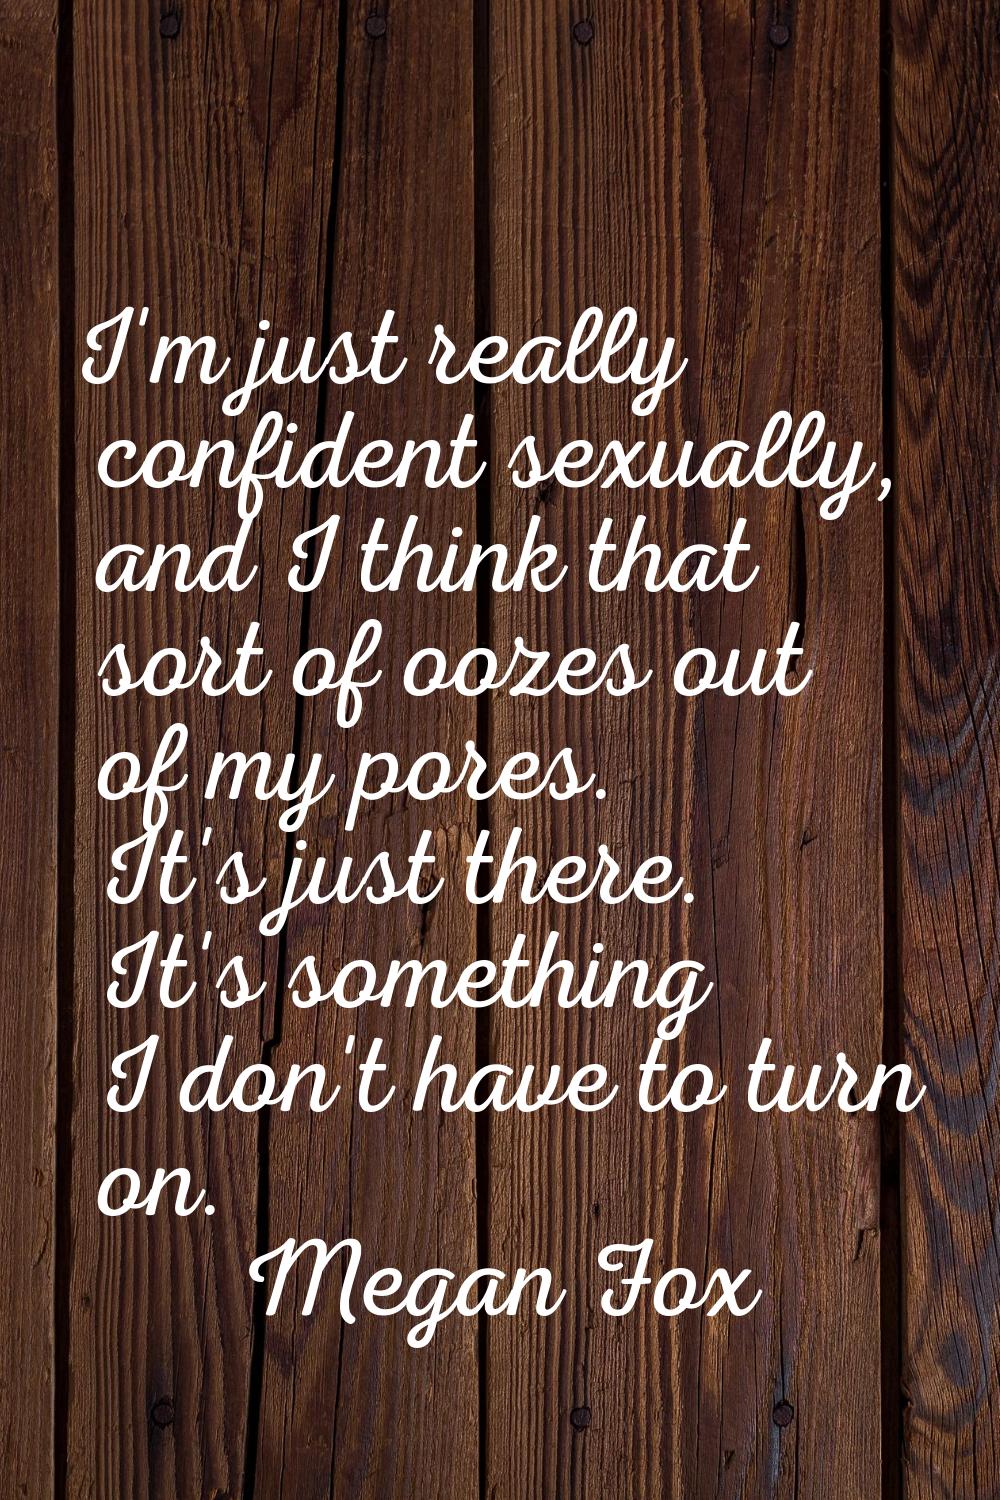 I'm just really confident sexually, and I think that sort of oozes out of my pores. It's just there